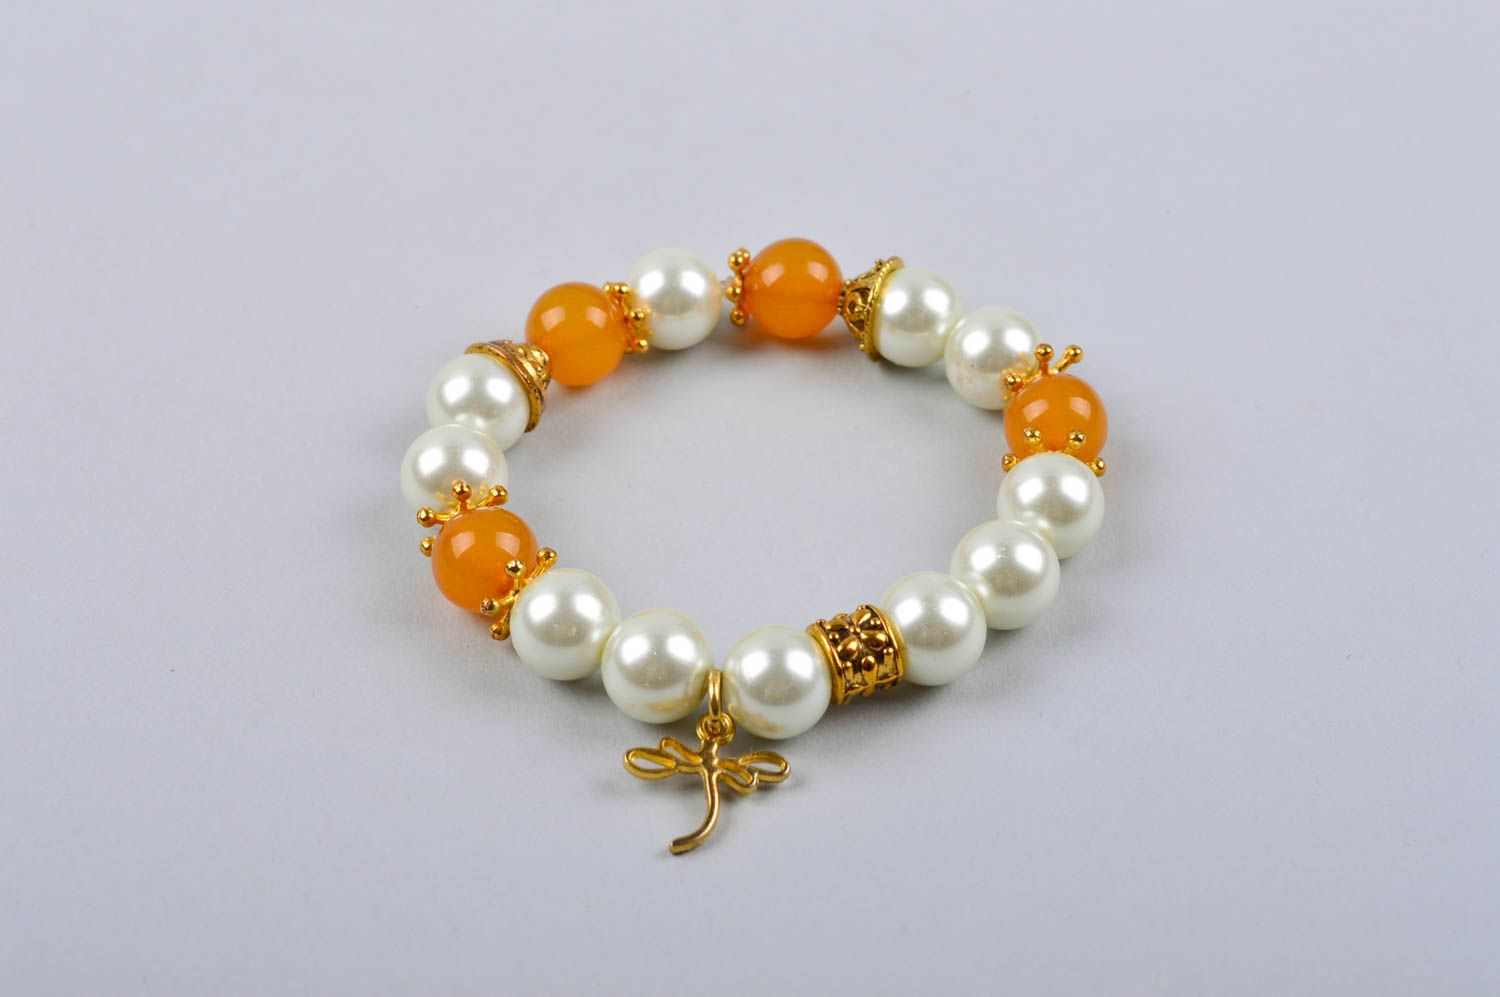 Handcrafted bracelet amber and white beads fashion designer wrist accessory photo 3